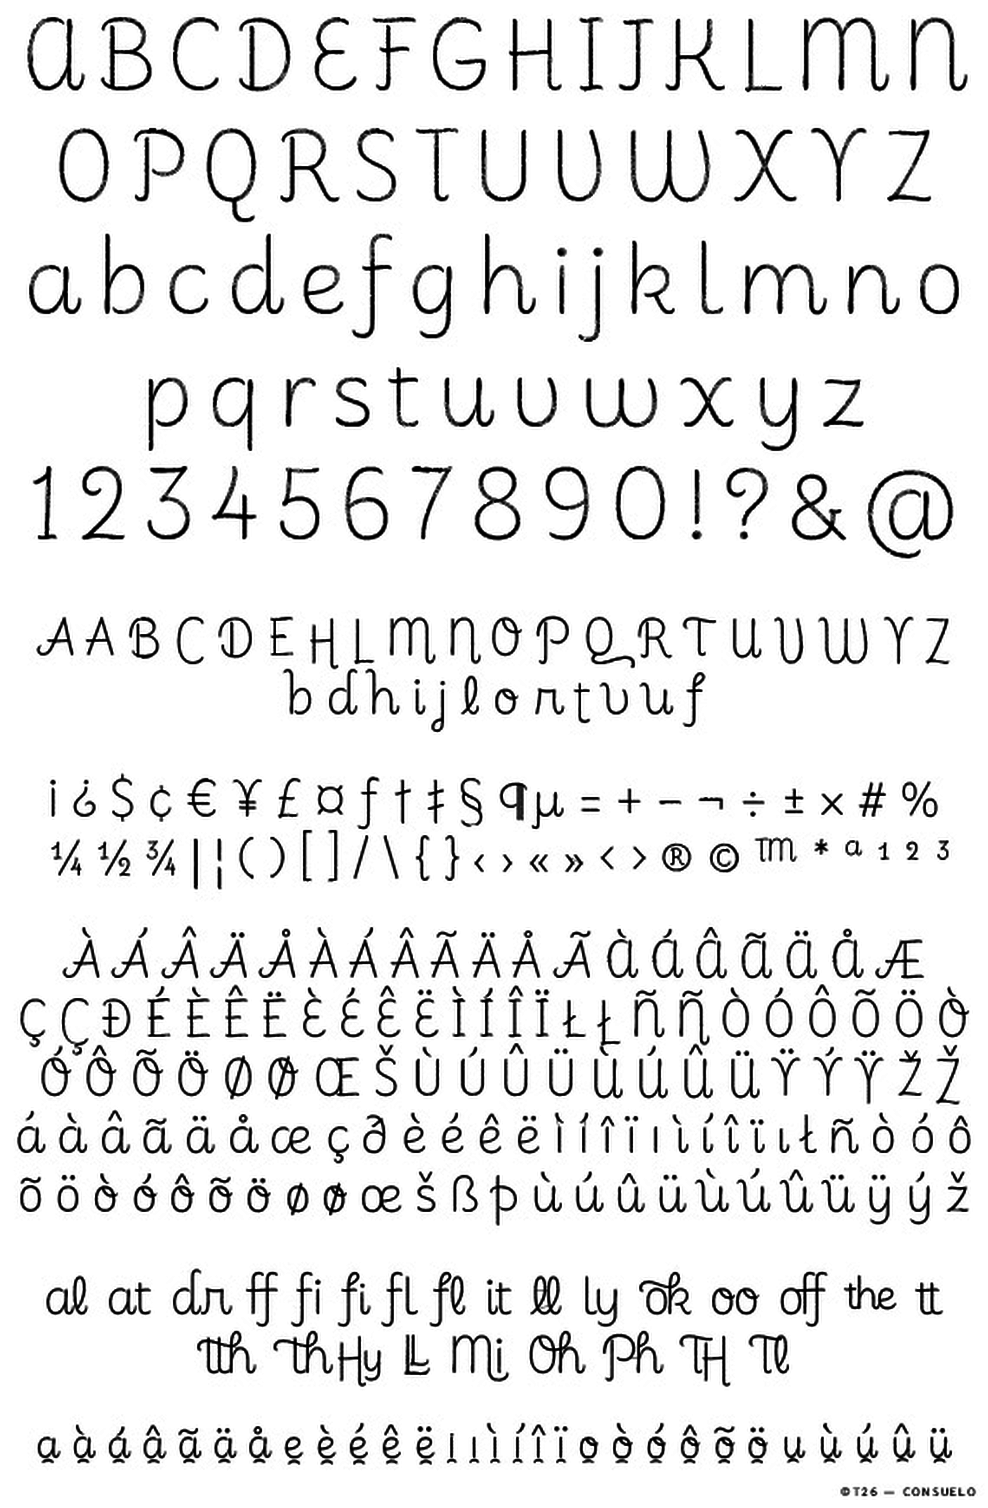 T 26 Digital Type Foundry Fonts Consuelo